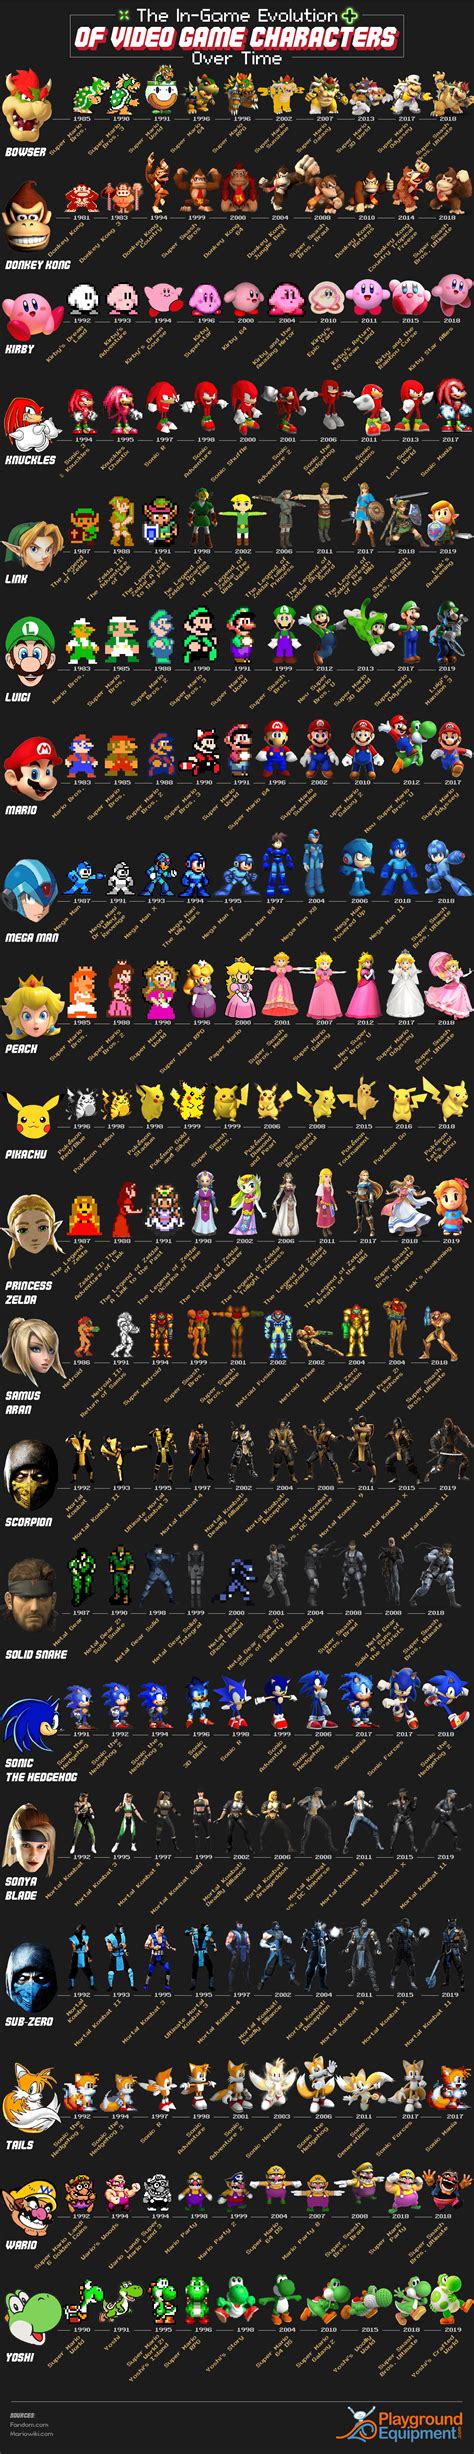 The Incredible Evolution Of Video Game Characters From 1981 Present